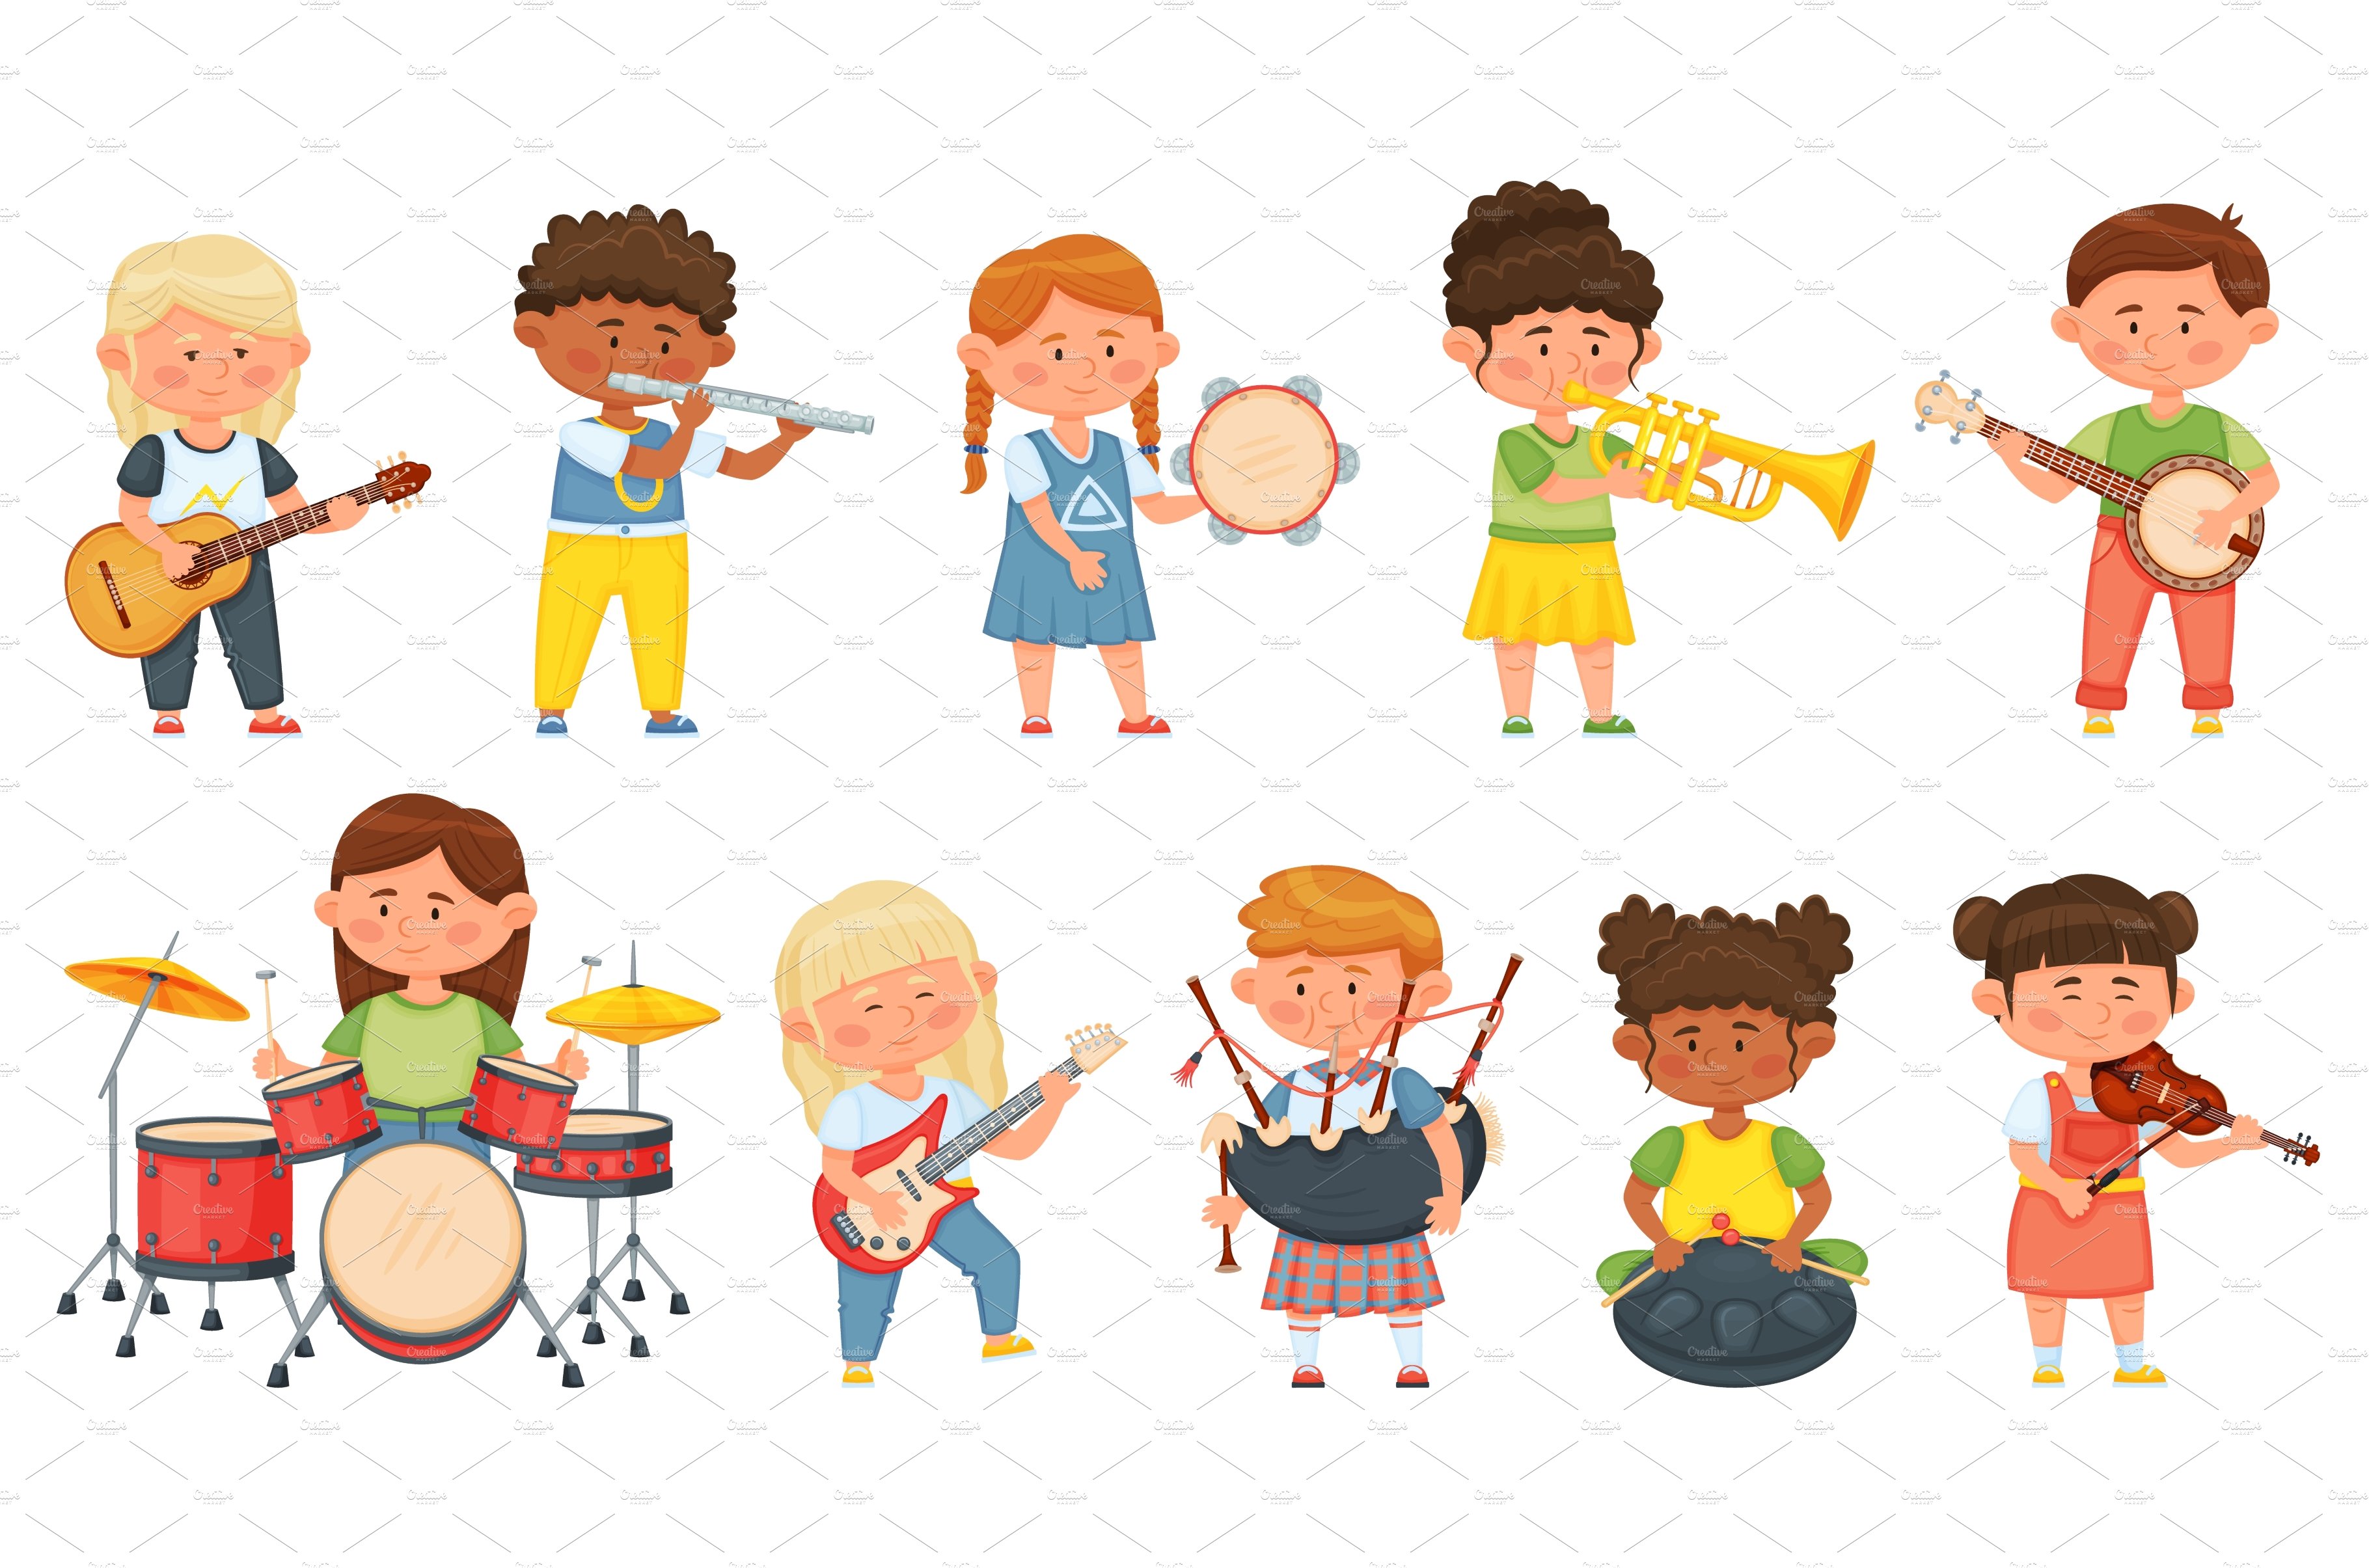 Kids playing musical instruments cover image.